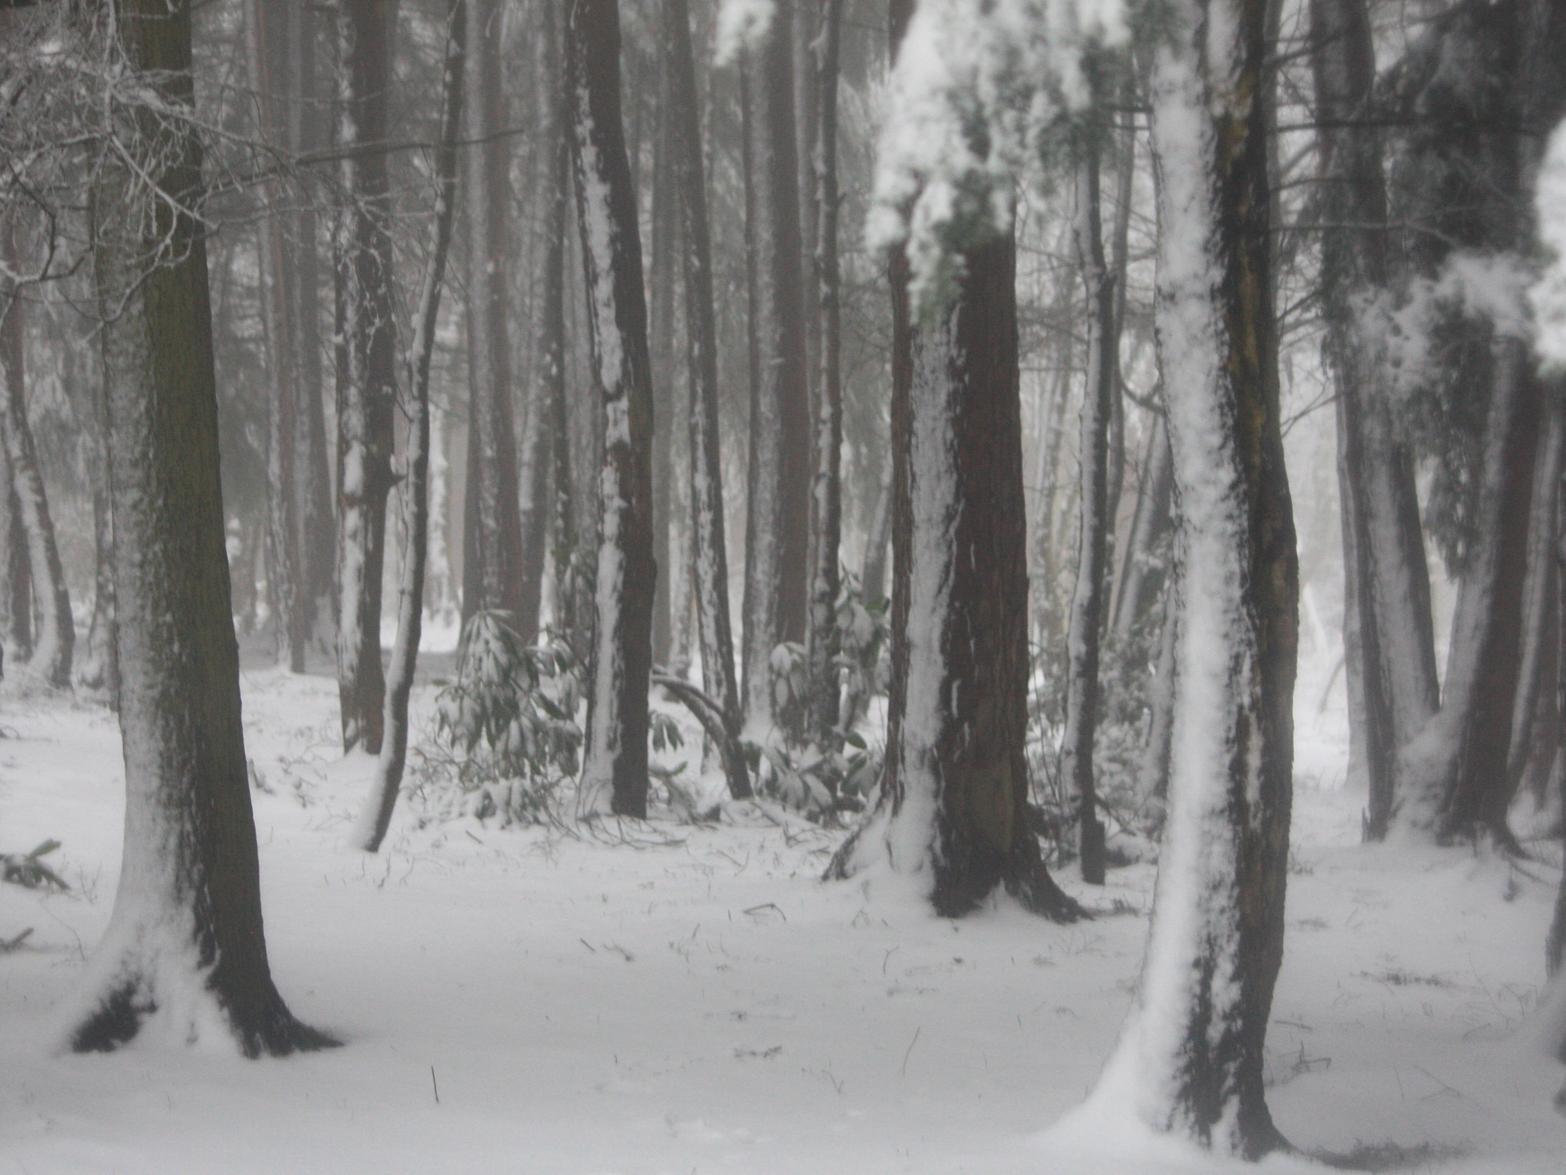 Undisturbed and picturesque snow at the Pinewoods.